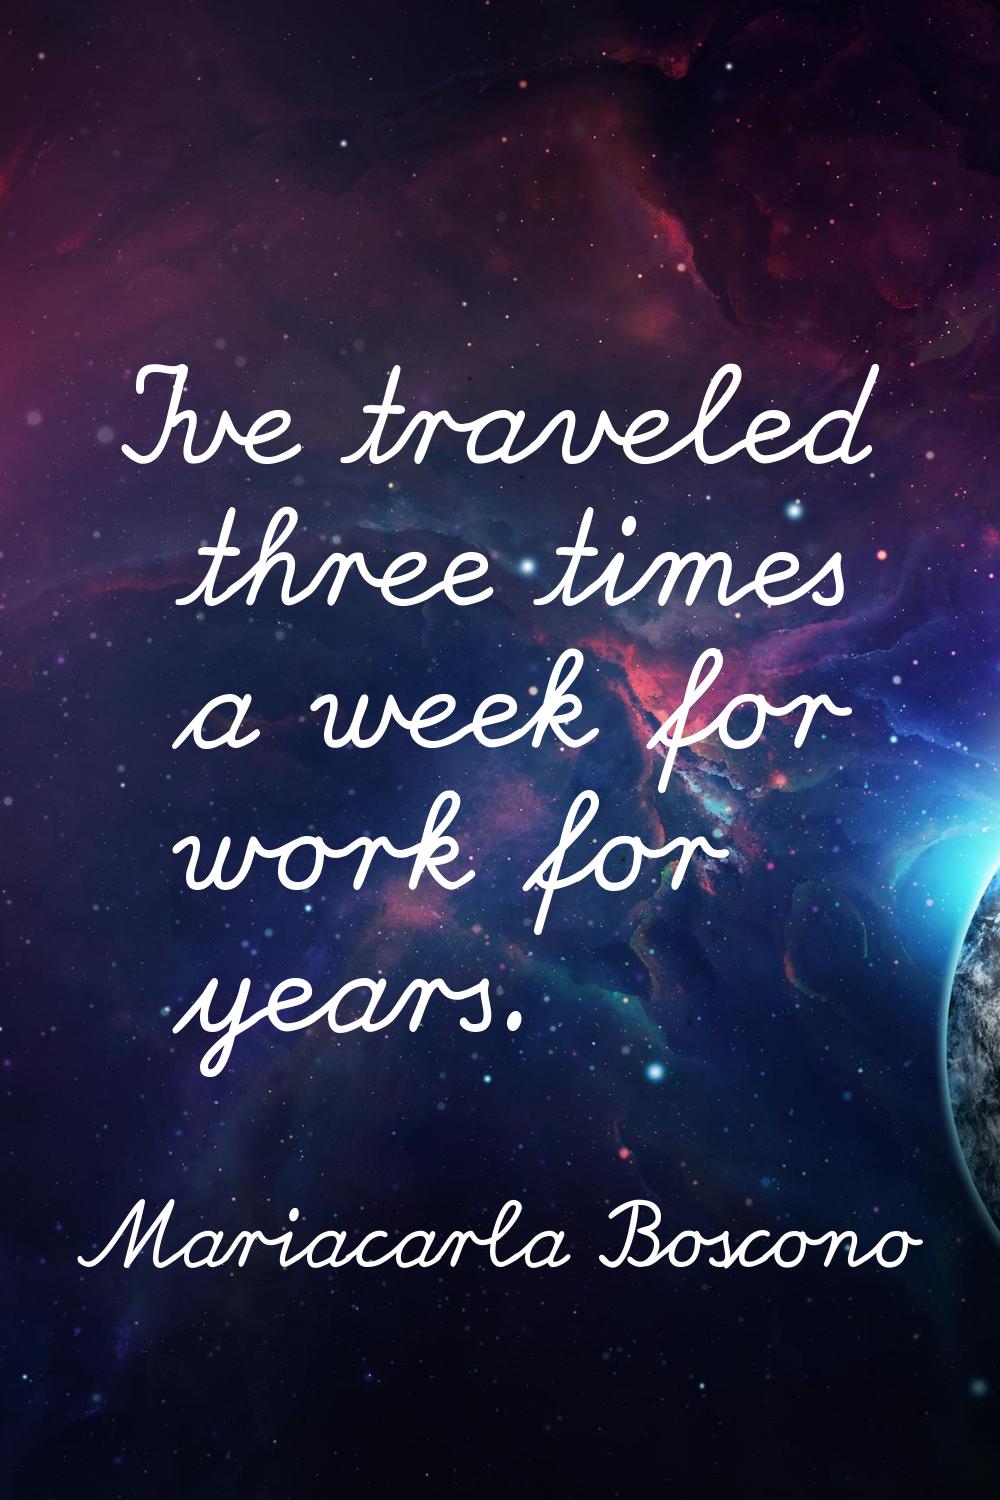 I've traveled three times a week for work for years.